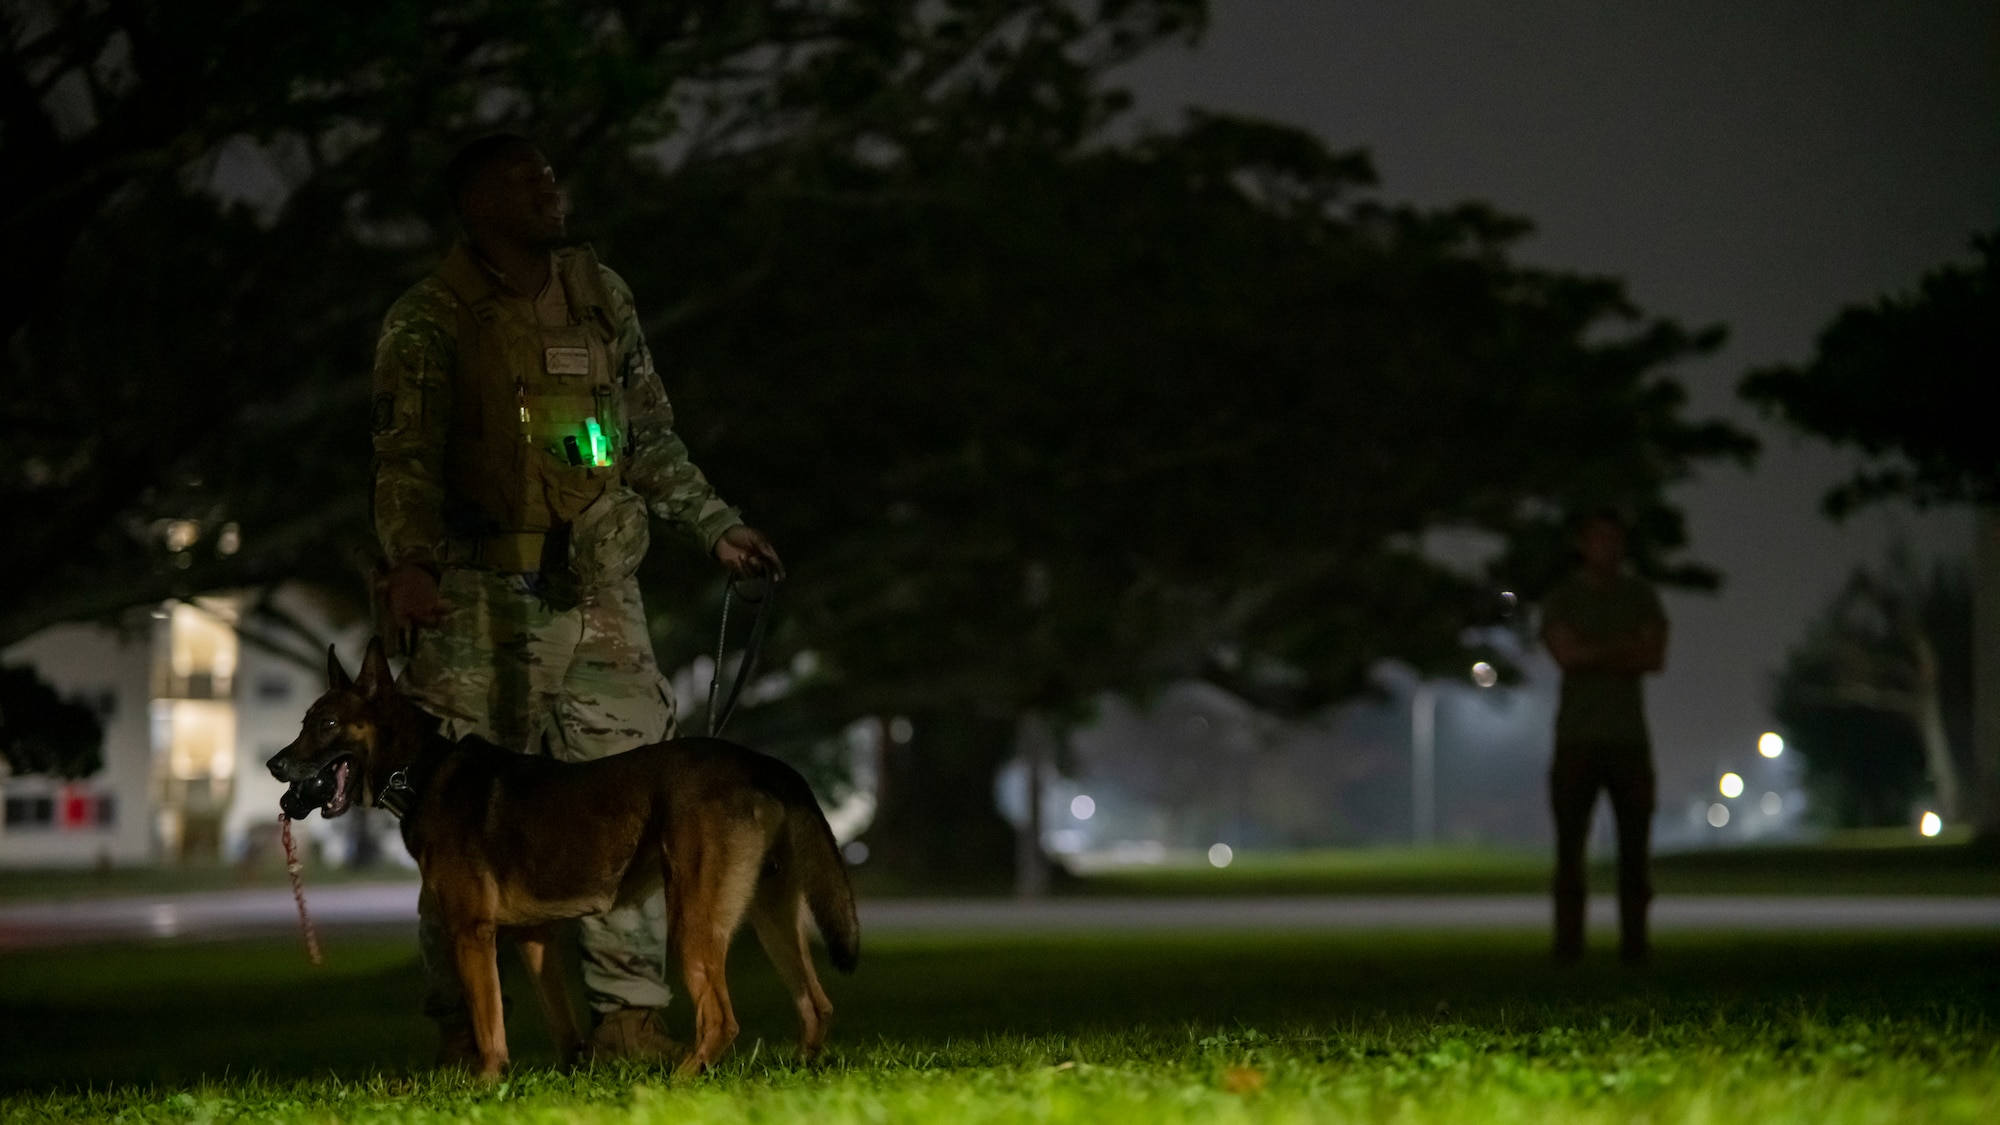 Military working dog trainer stands with his dog as he simulates de-escalating a hostile situation